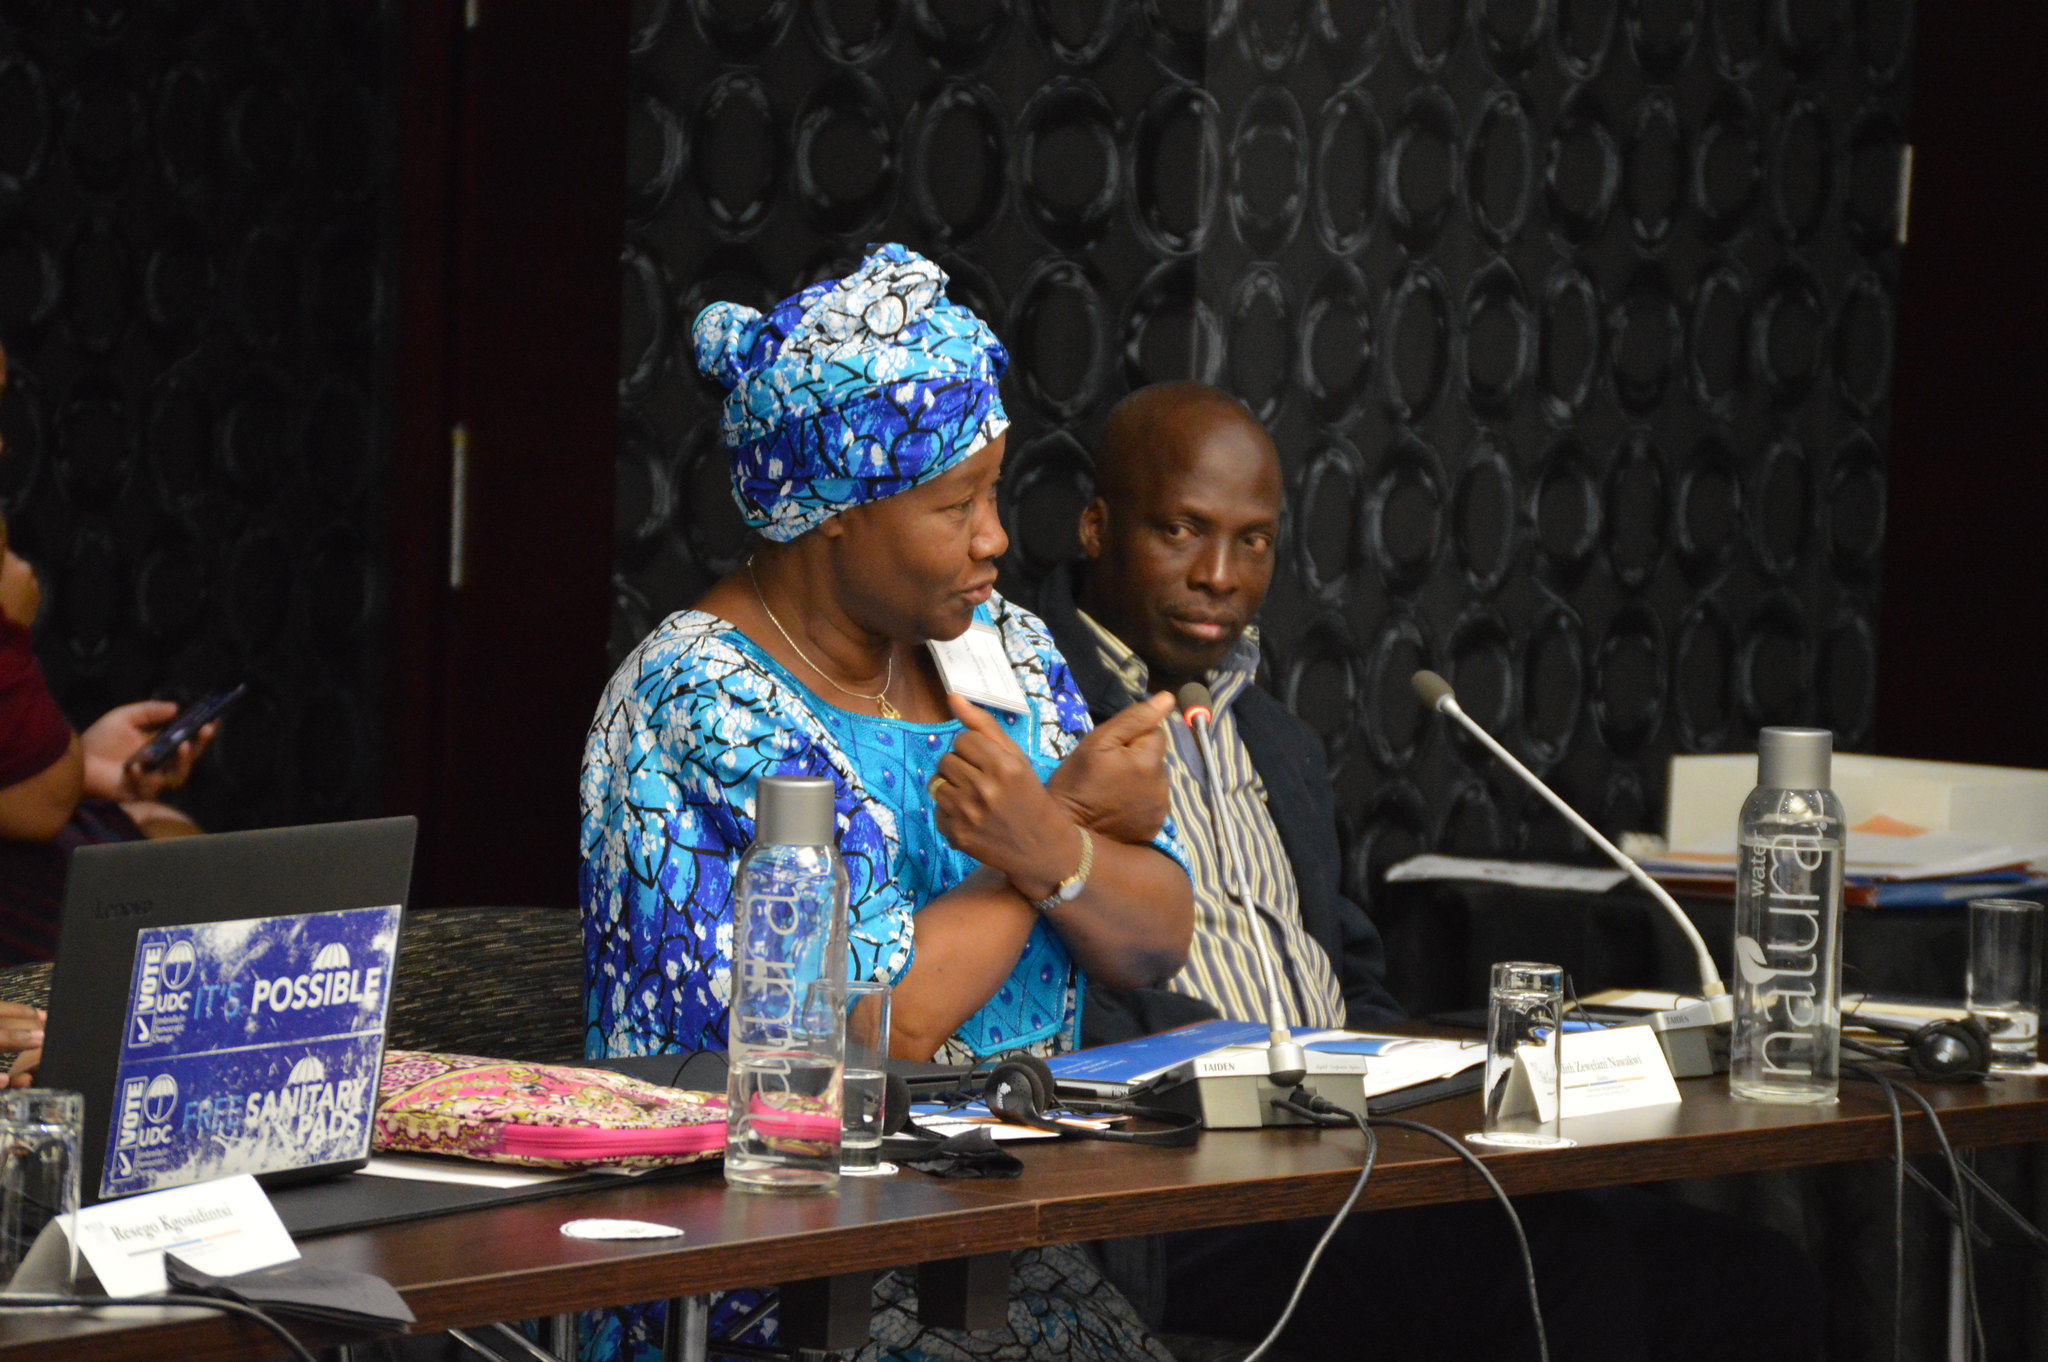 Edith Zewelani Nawakwi, senior party leader from Zambia, shared her experience as a female party leader in her country